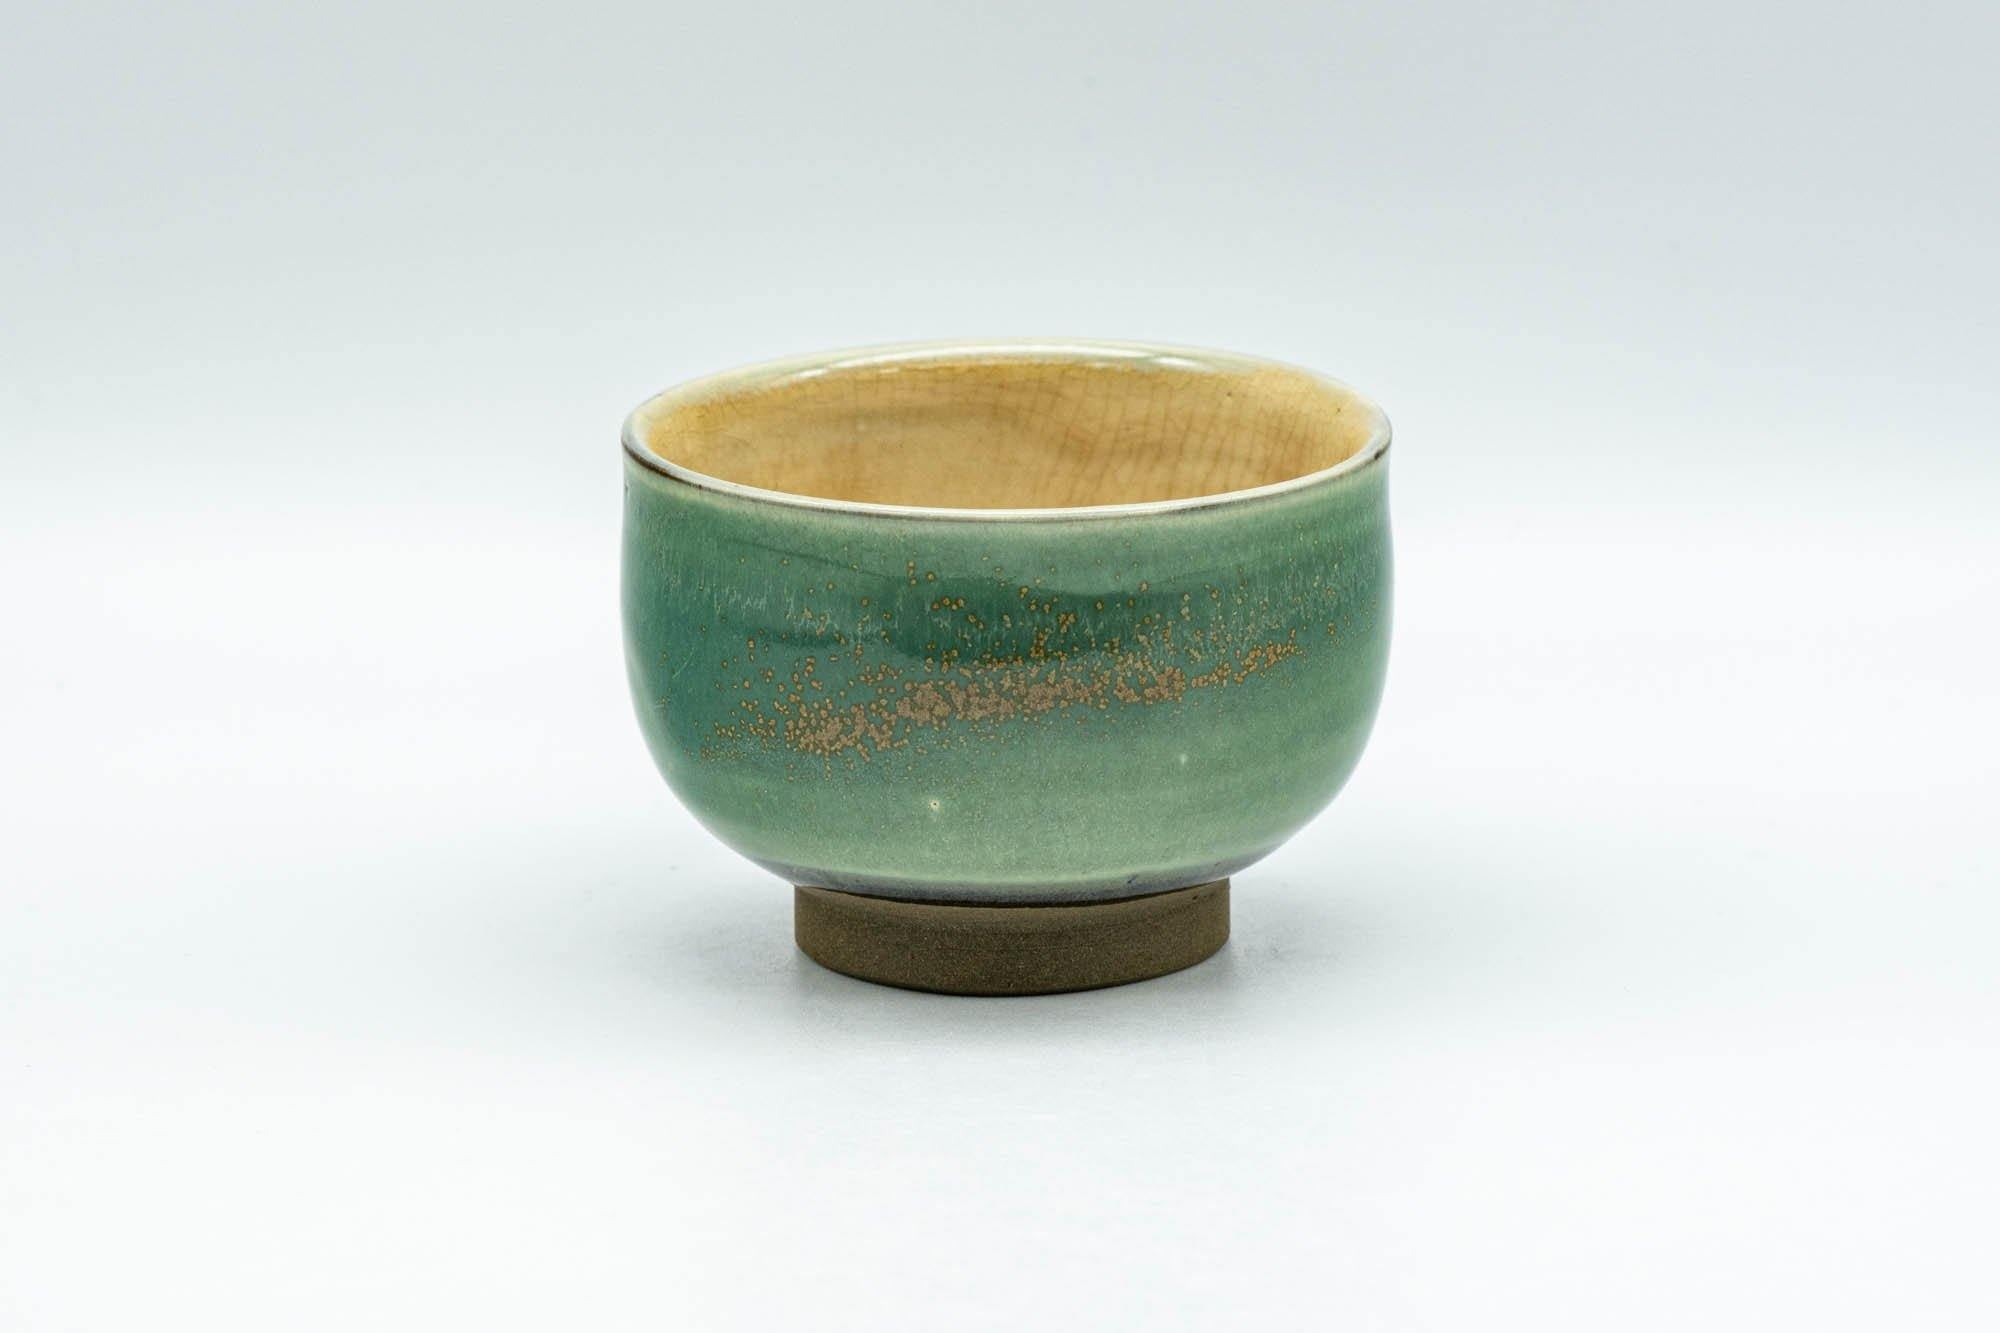 Japanese Teacup - Emerald Green Gold Speckled Yunomi - 80ml - Tezumi